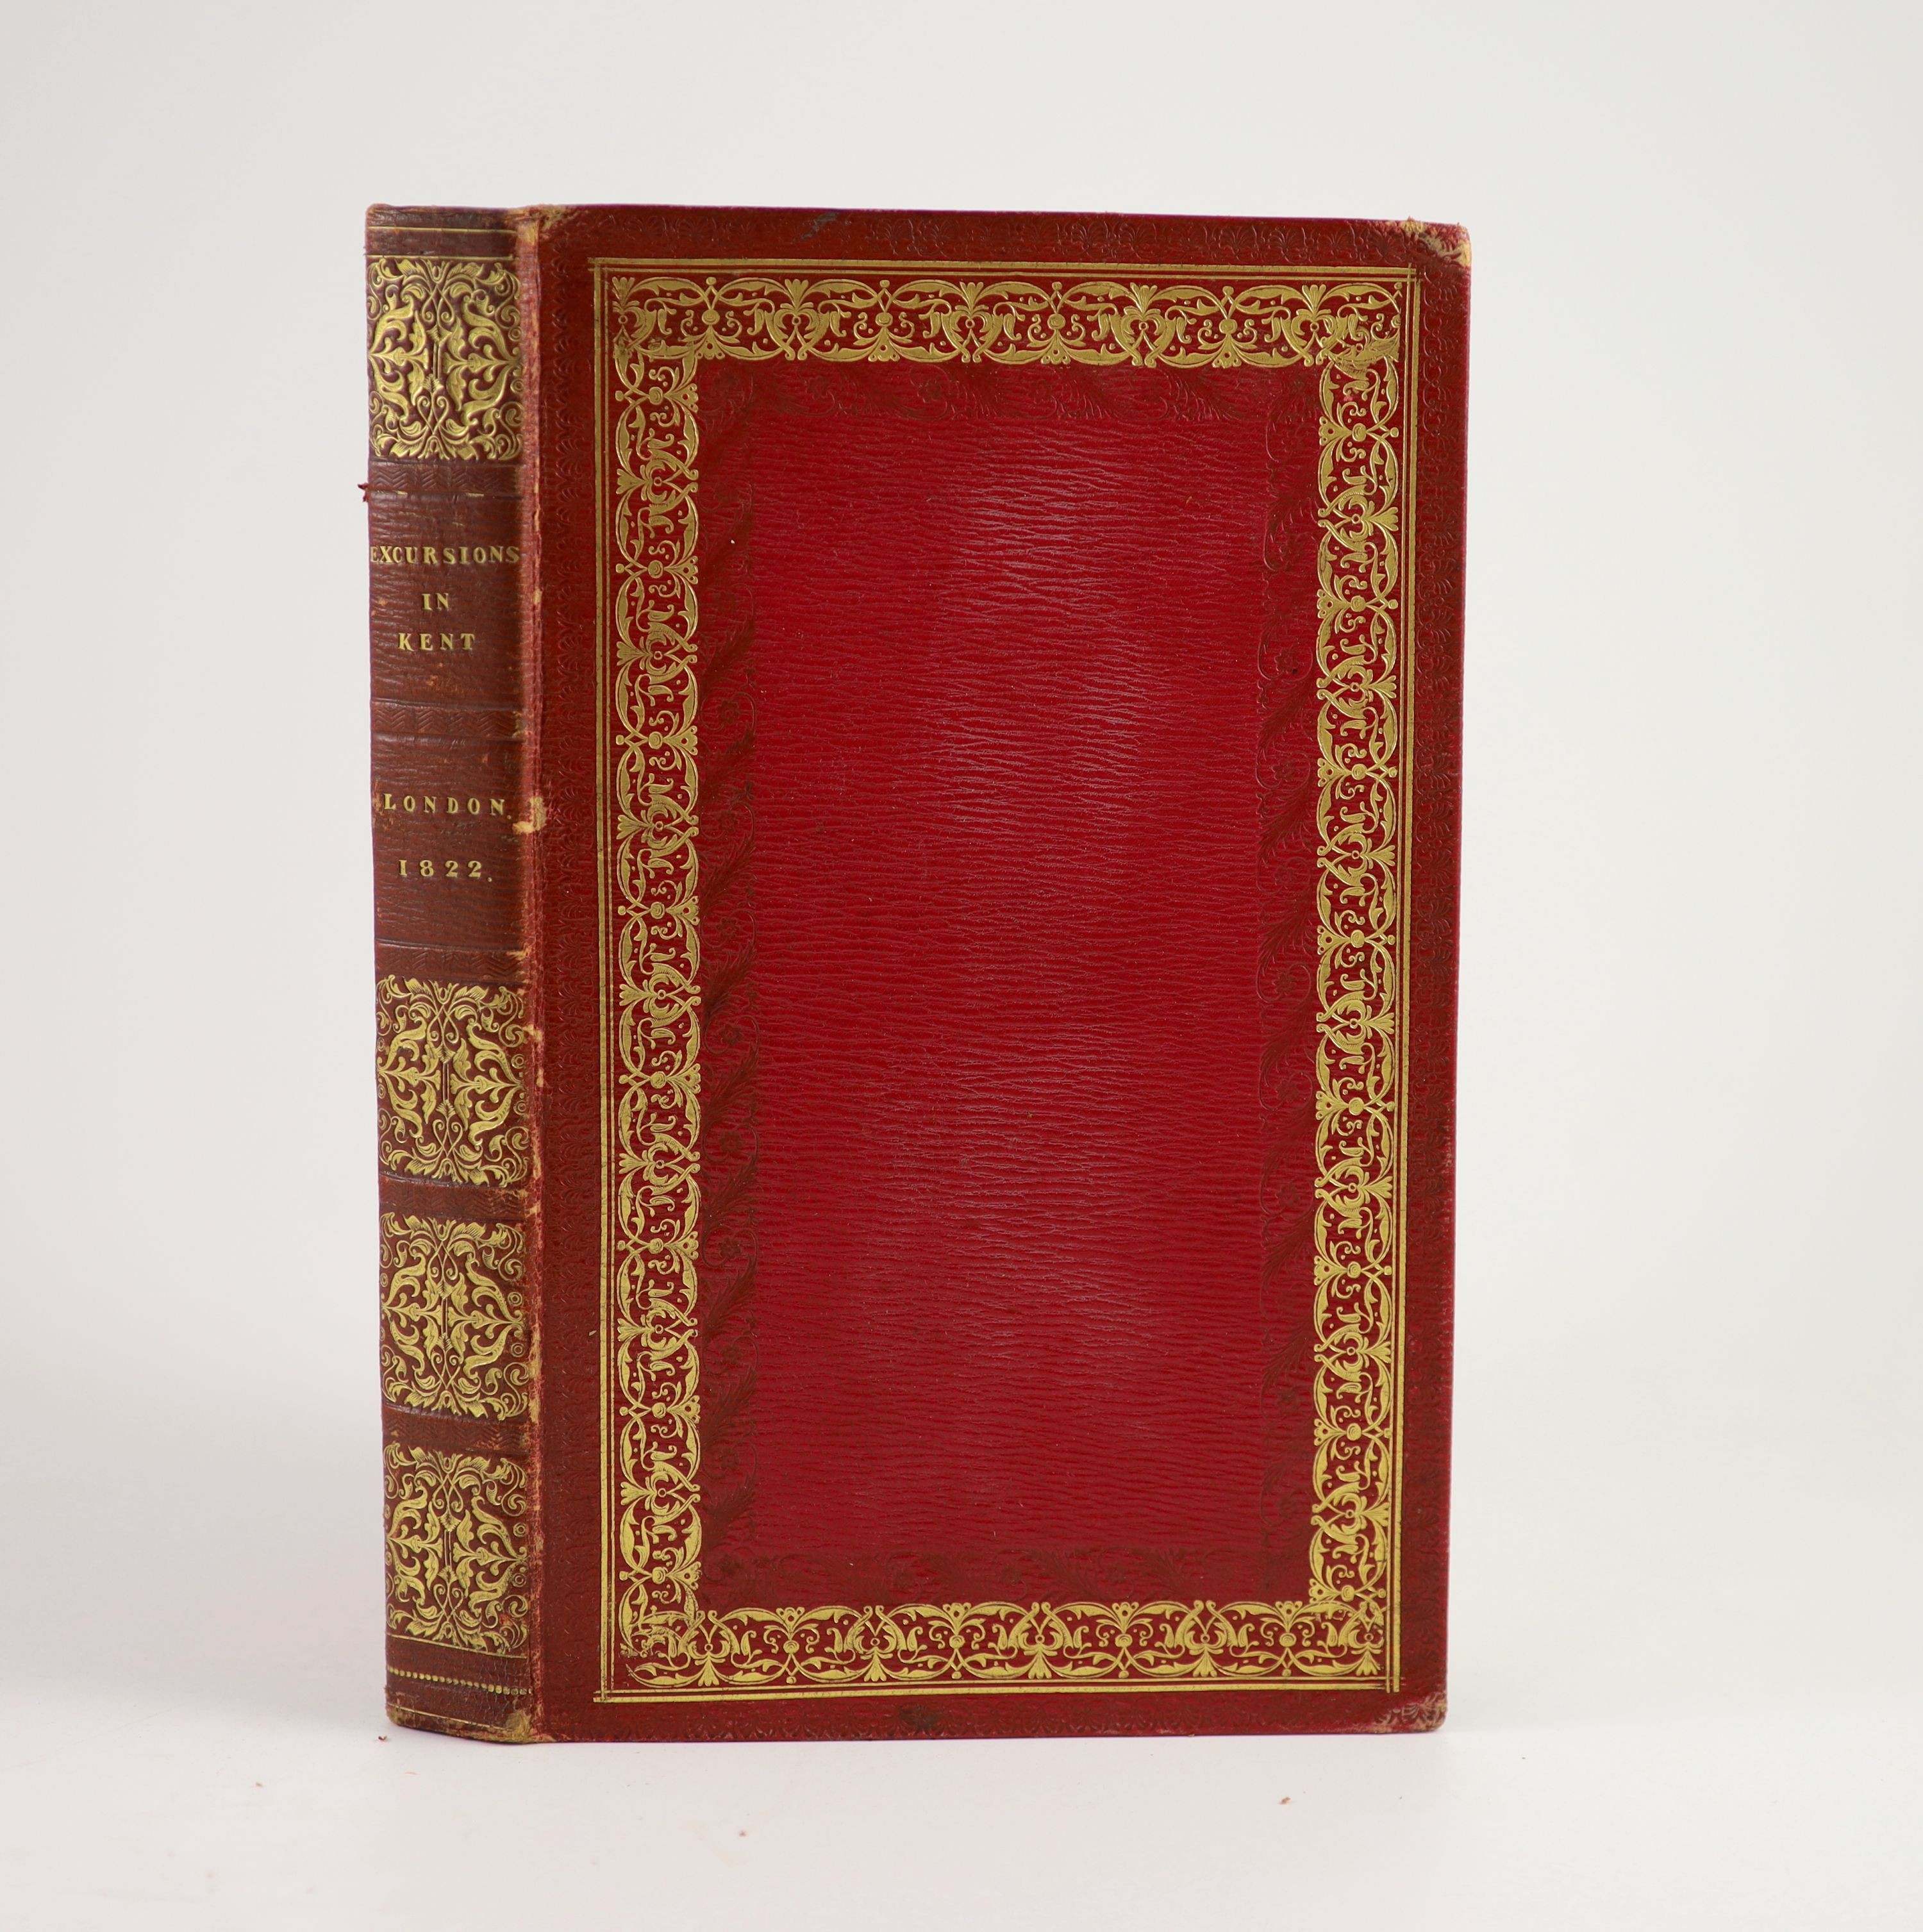 [Cromwell, Thomas] - Excursions in the County of Kent, qto, large paper edition, red morocco gilt, folding map and 44 plates, London, 1822